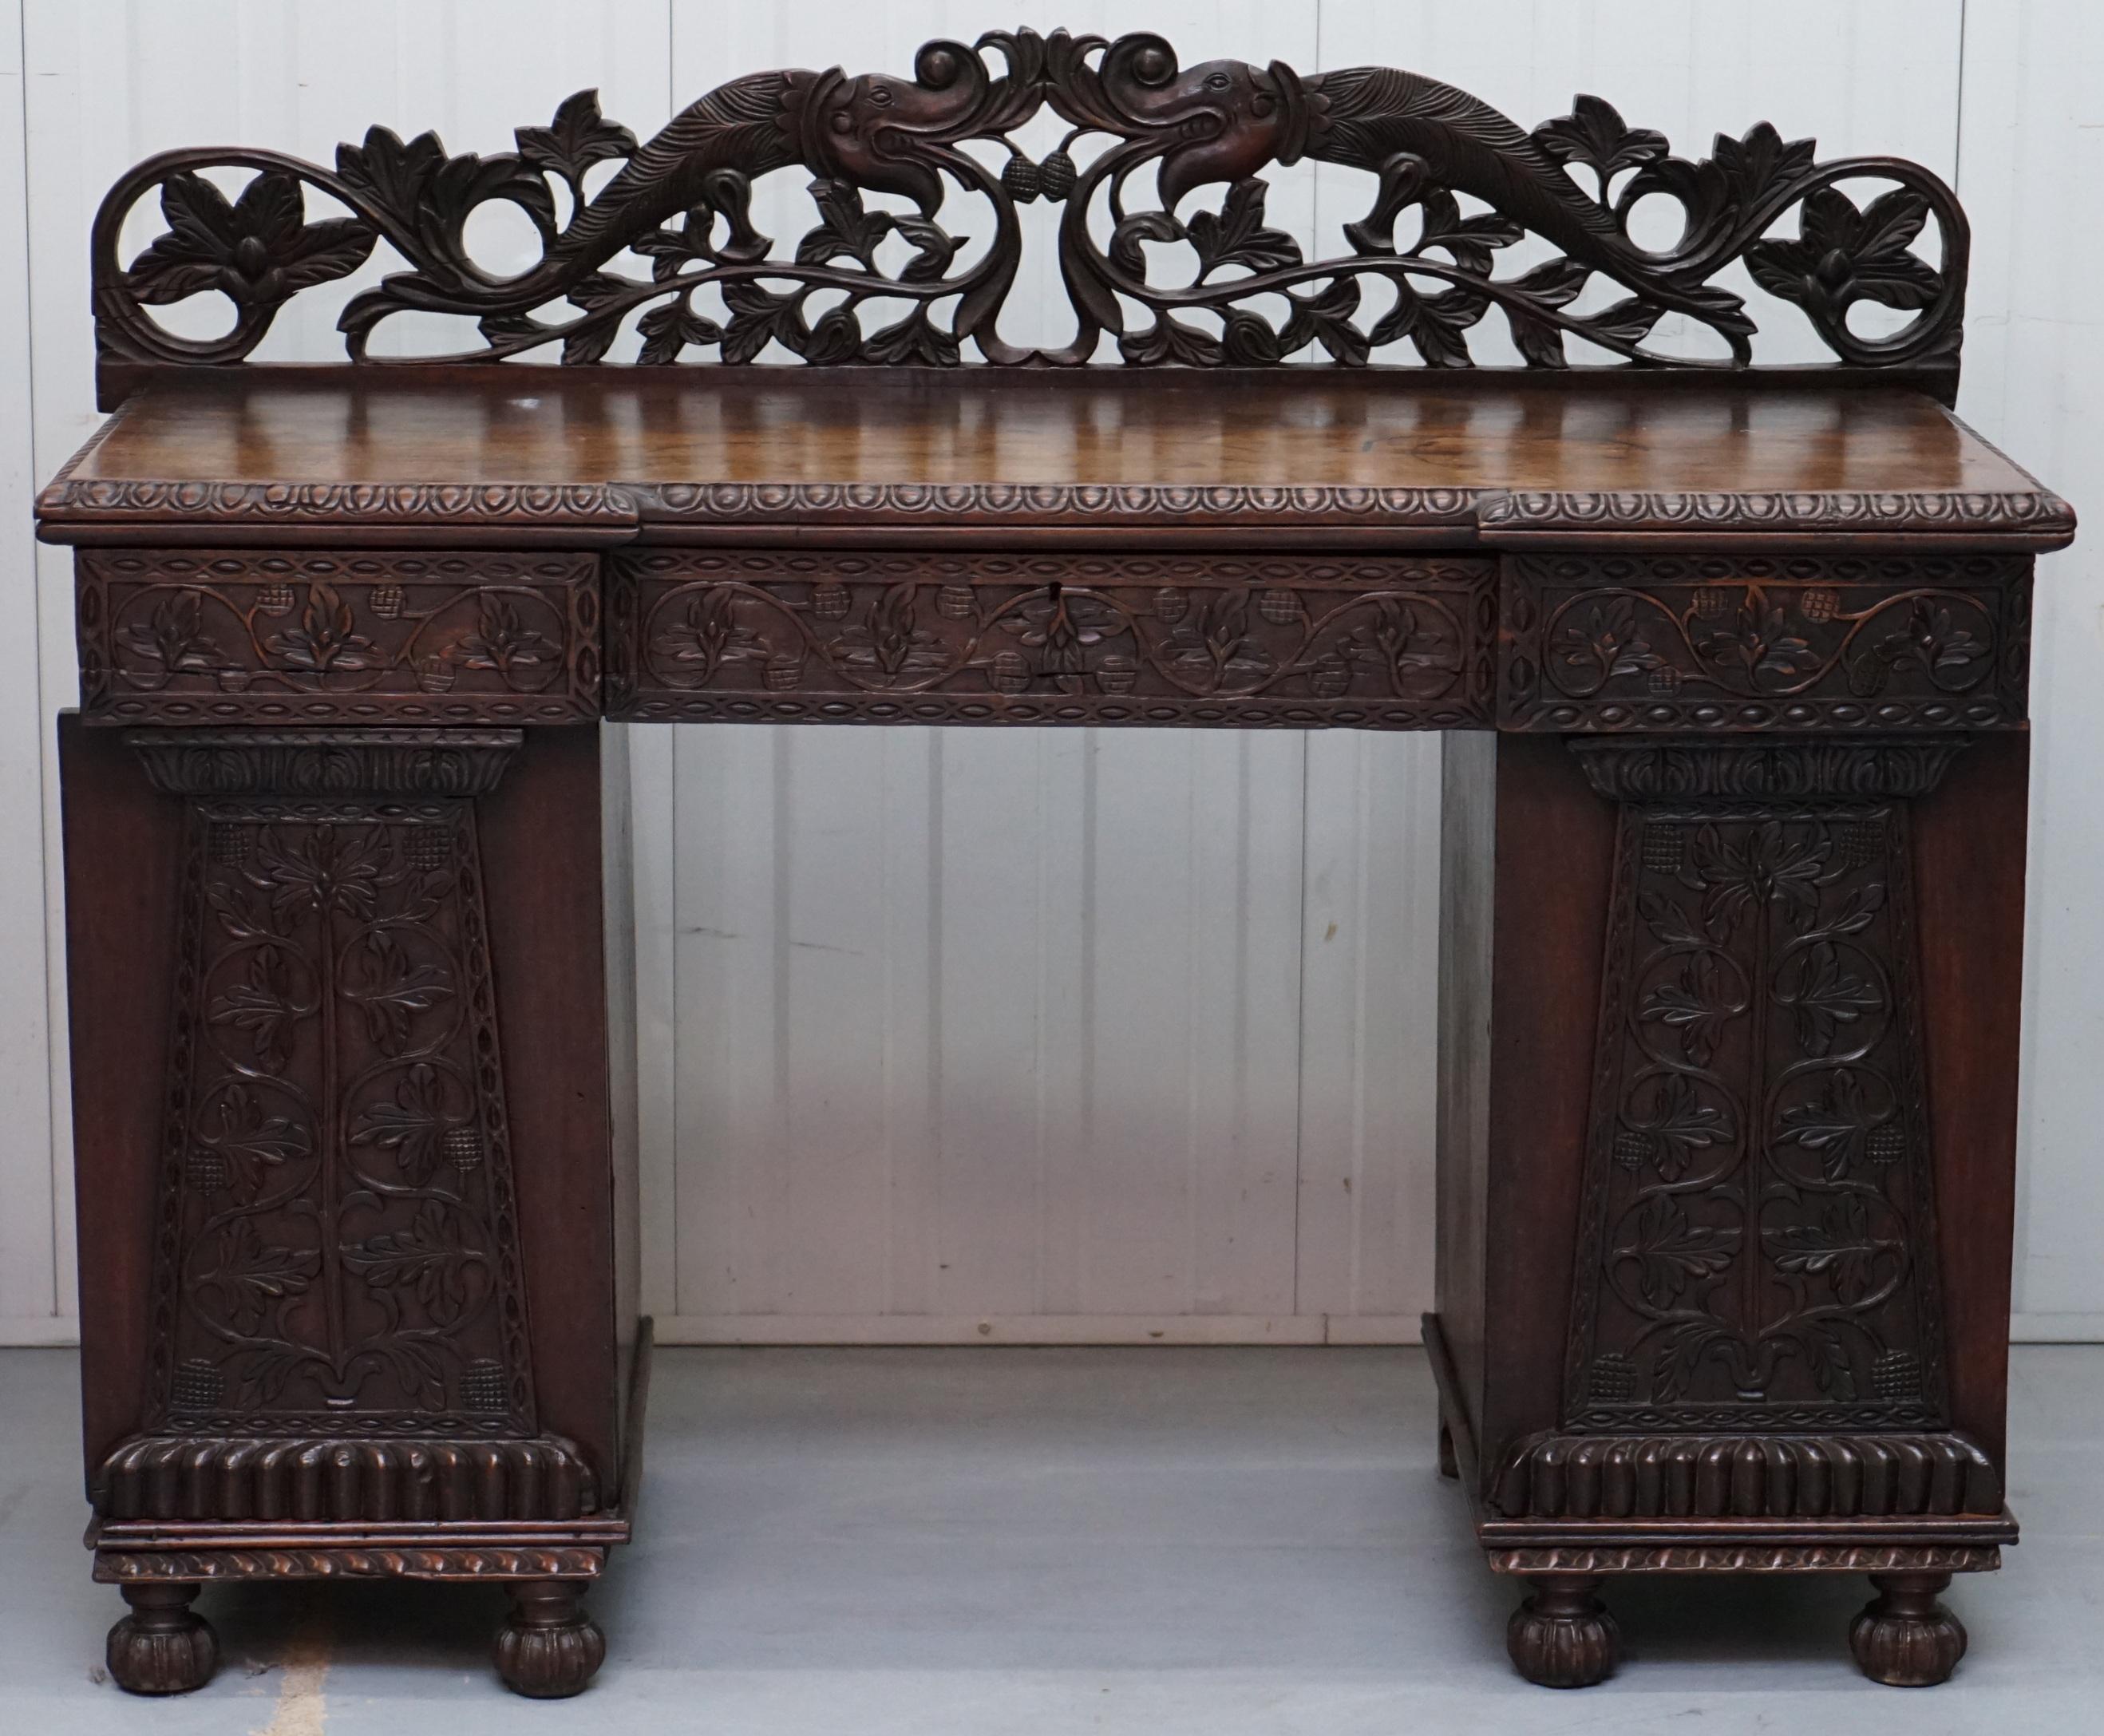 We are delighted to offer for sale this stunning 19th century Anglo Burmese hand carved sideboard with drawers and cupboards

A highly decorative and well made piece, it's complete and original, the timber has a lovely aged patina which really